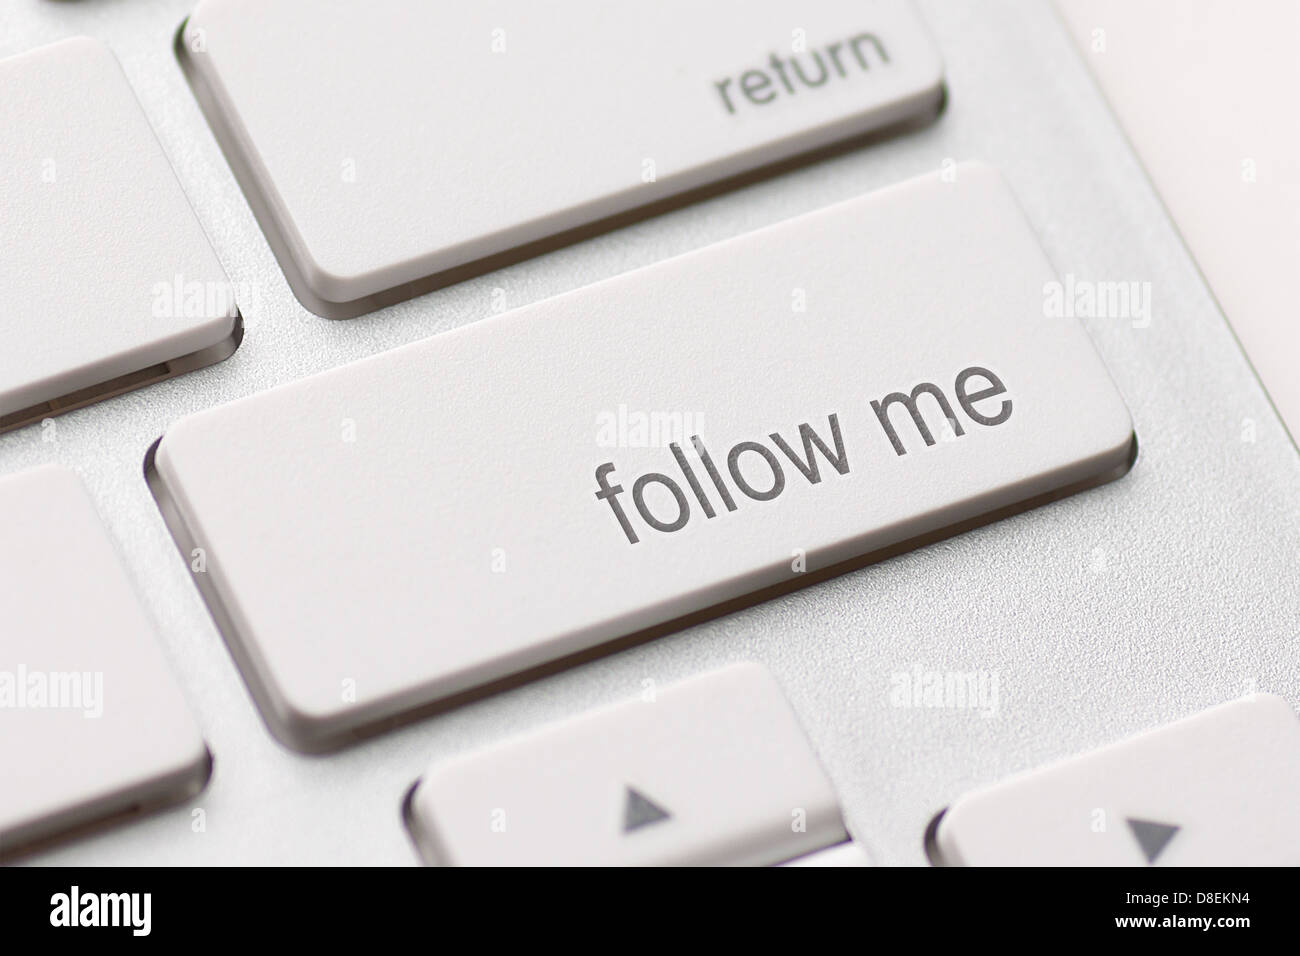 Follow Me button on the key of a computer keyboard Stock Photo